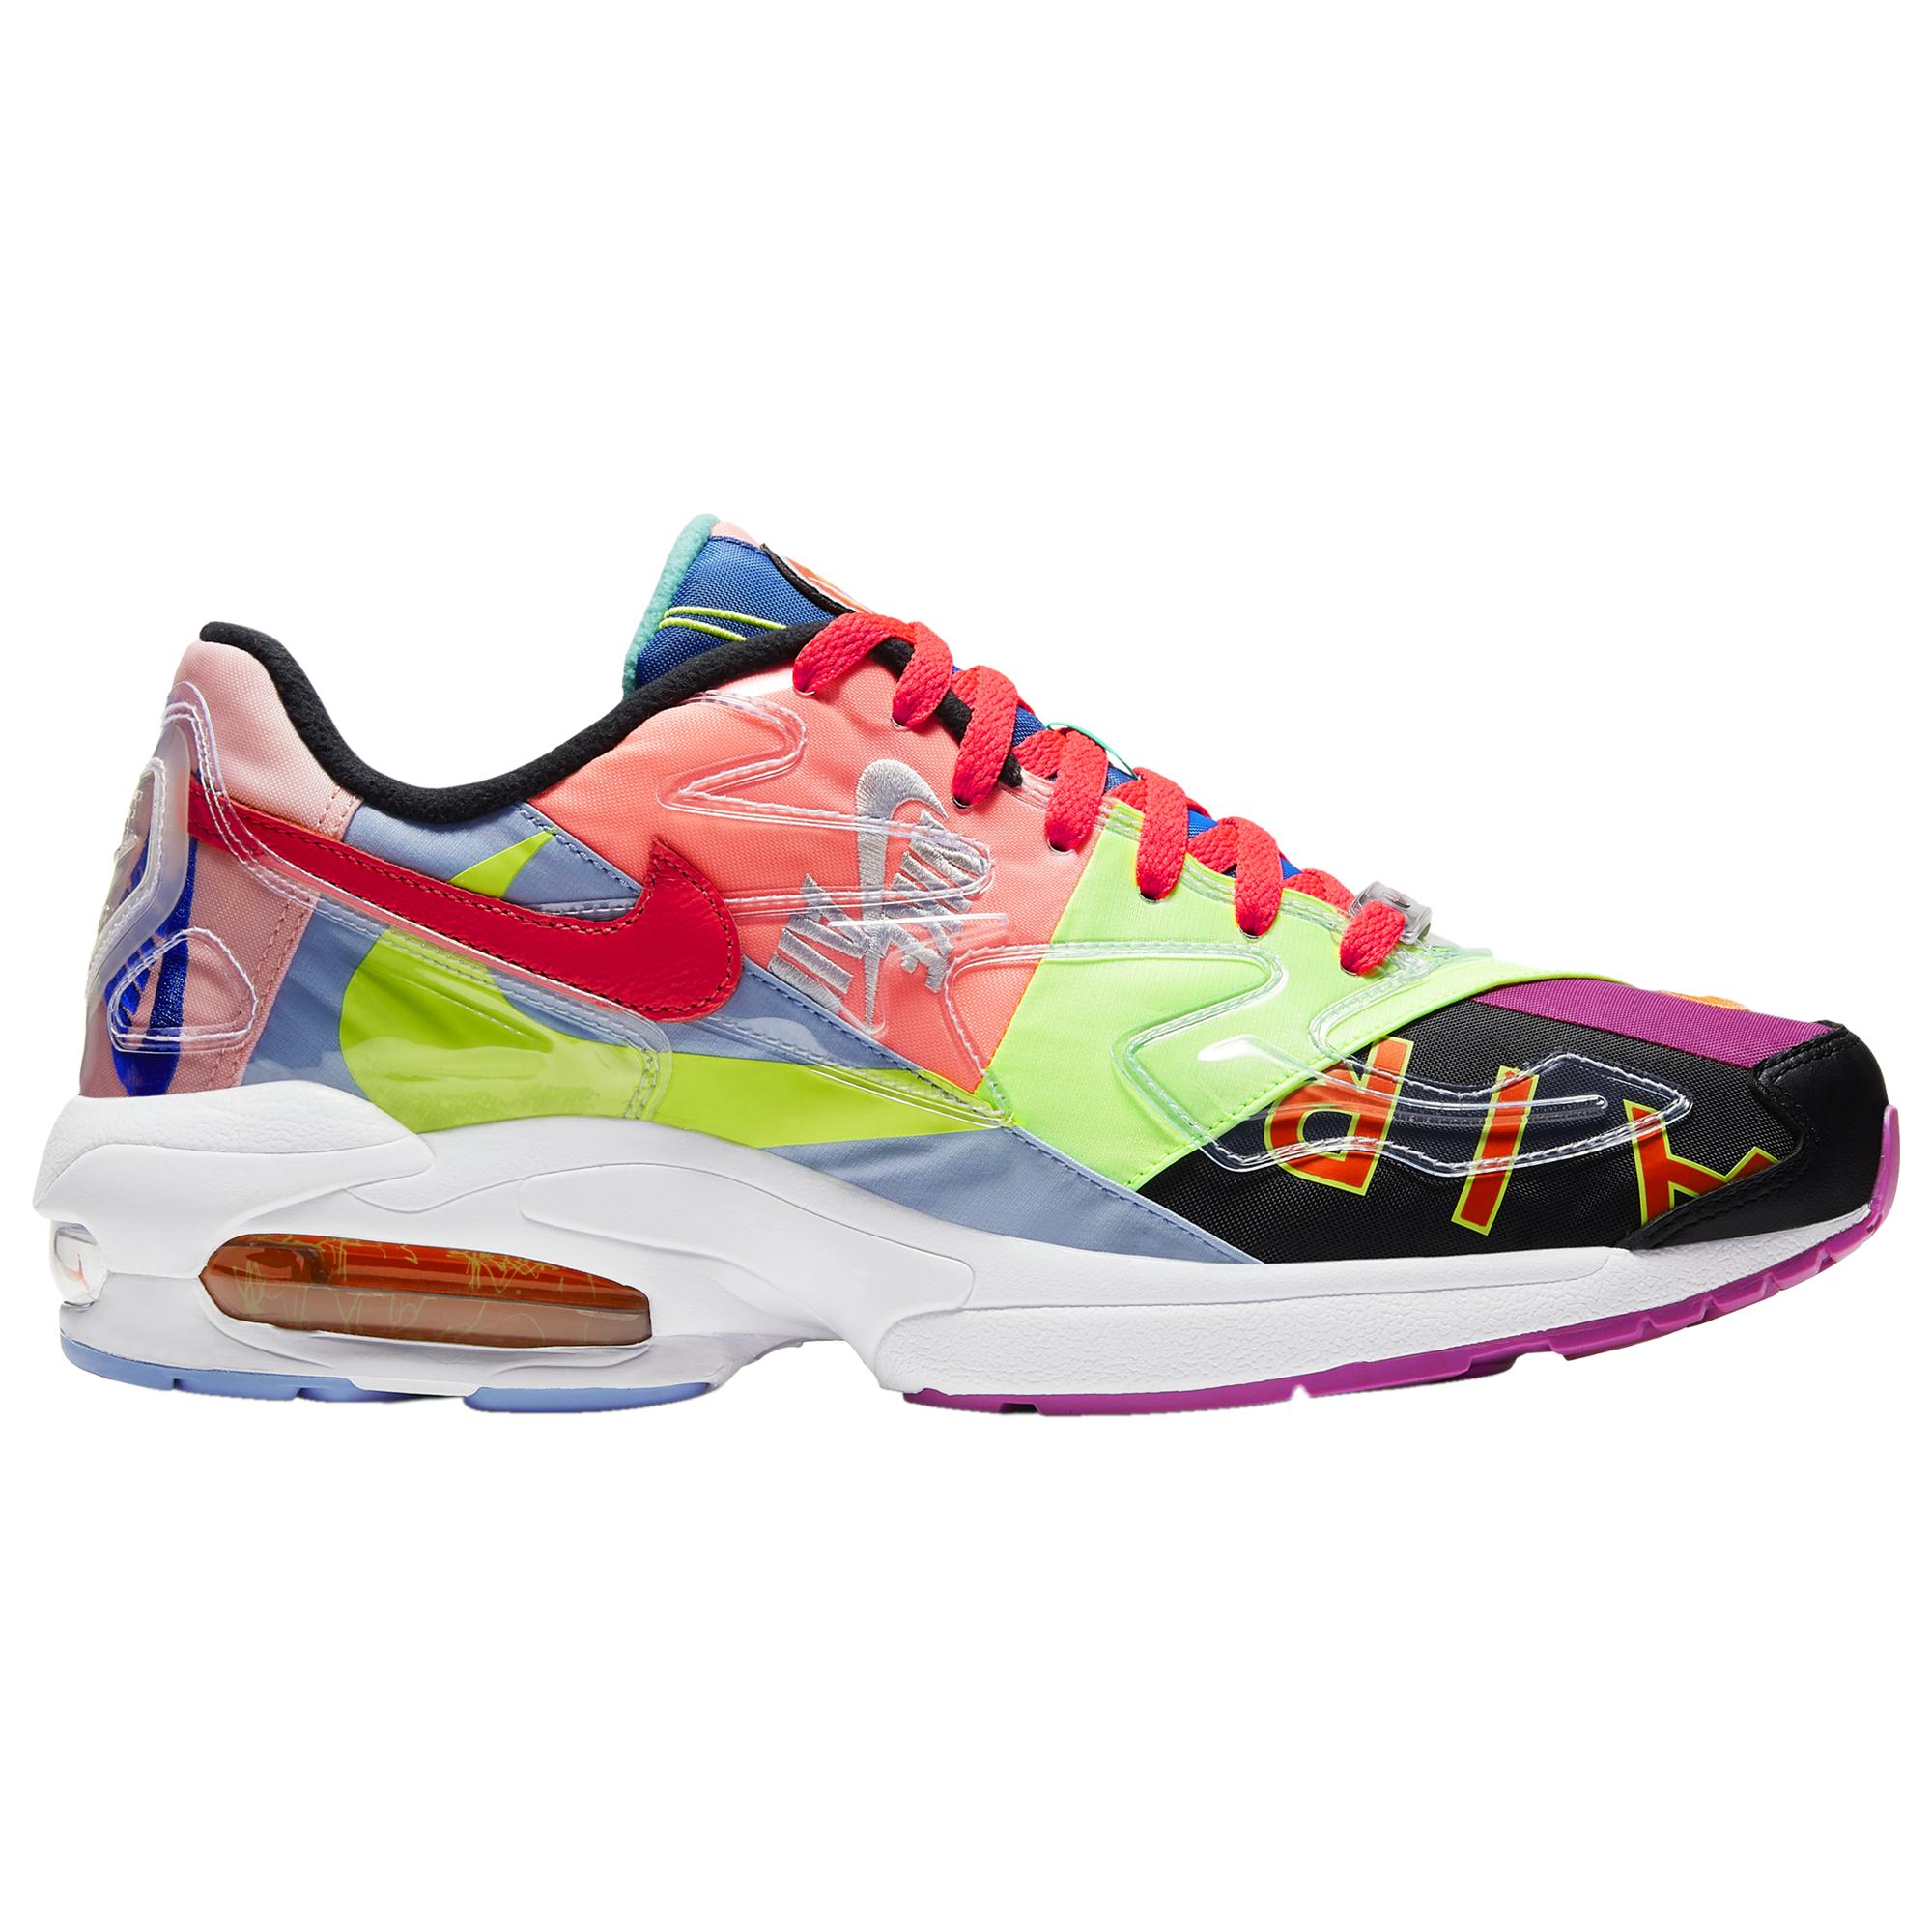 Nike Canvas Air Max 2 Light Qs 'atmos' Shoes - Size 4 for Men - Save 41